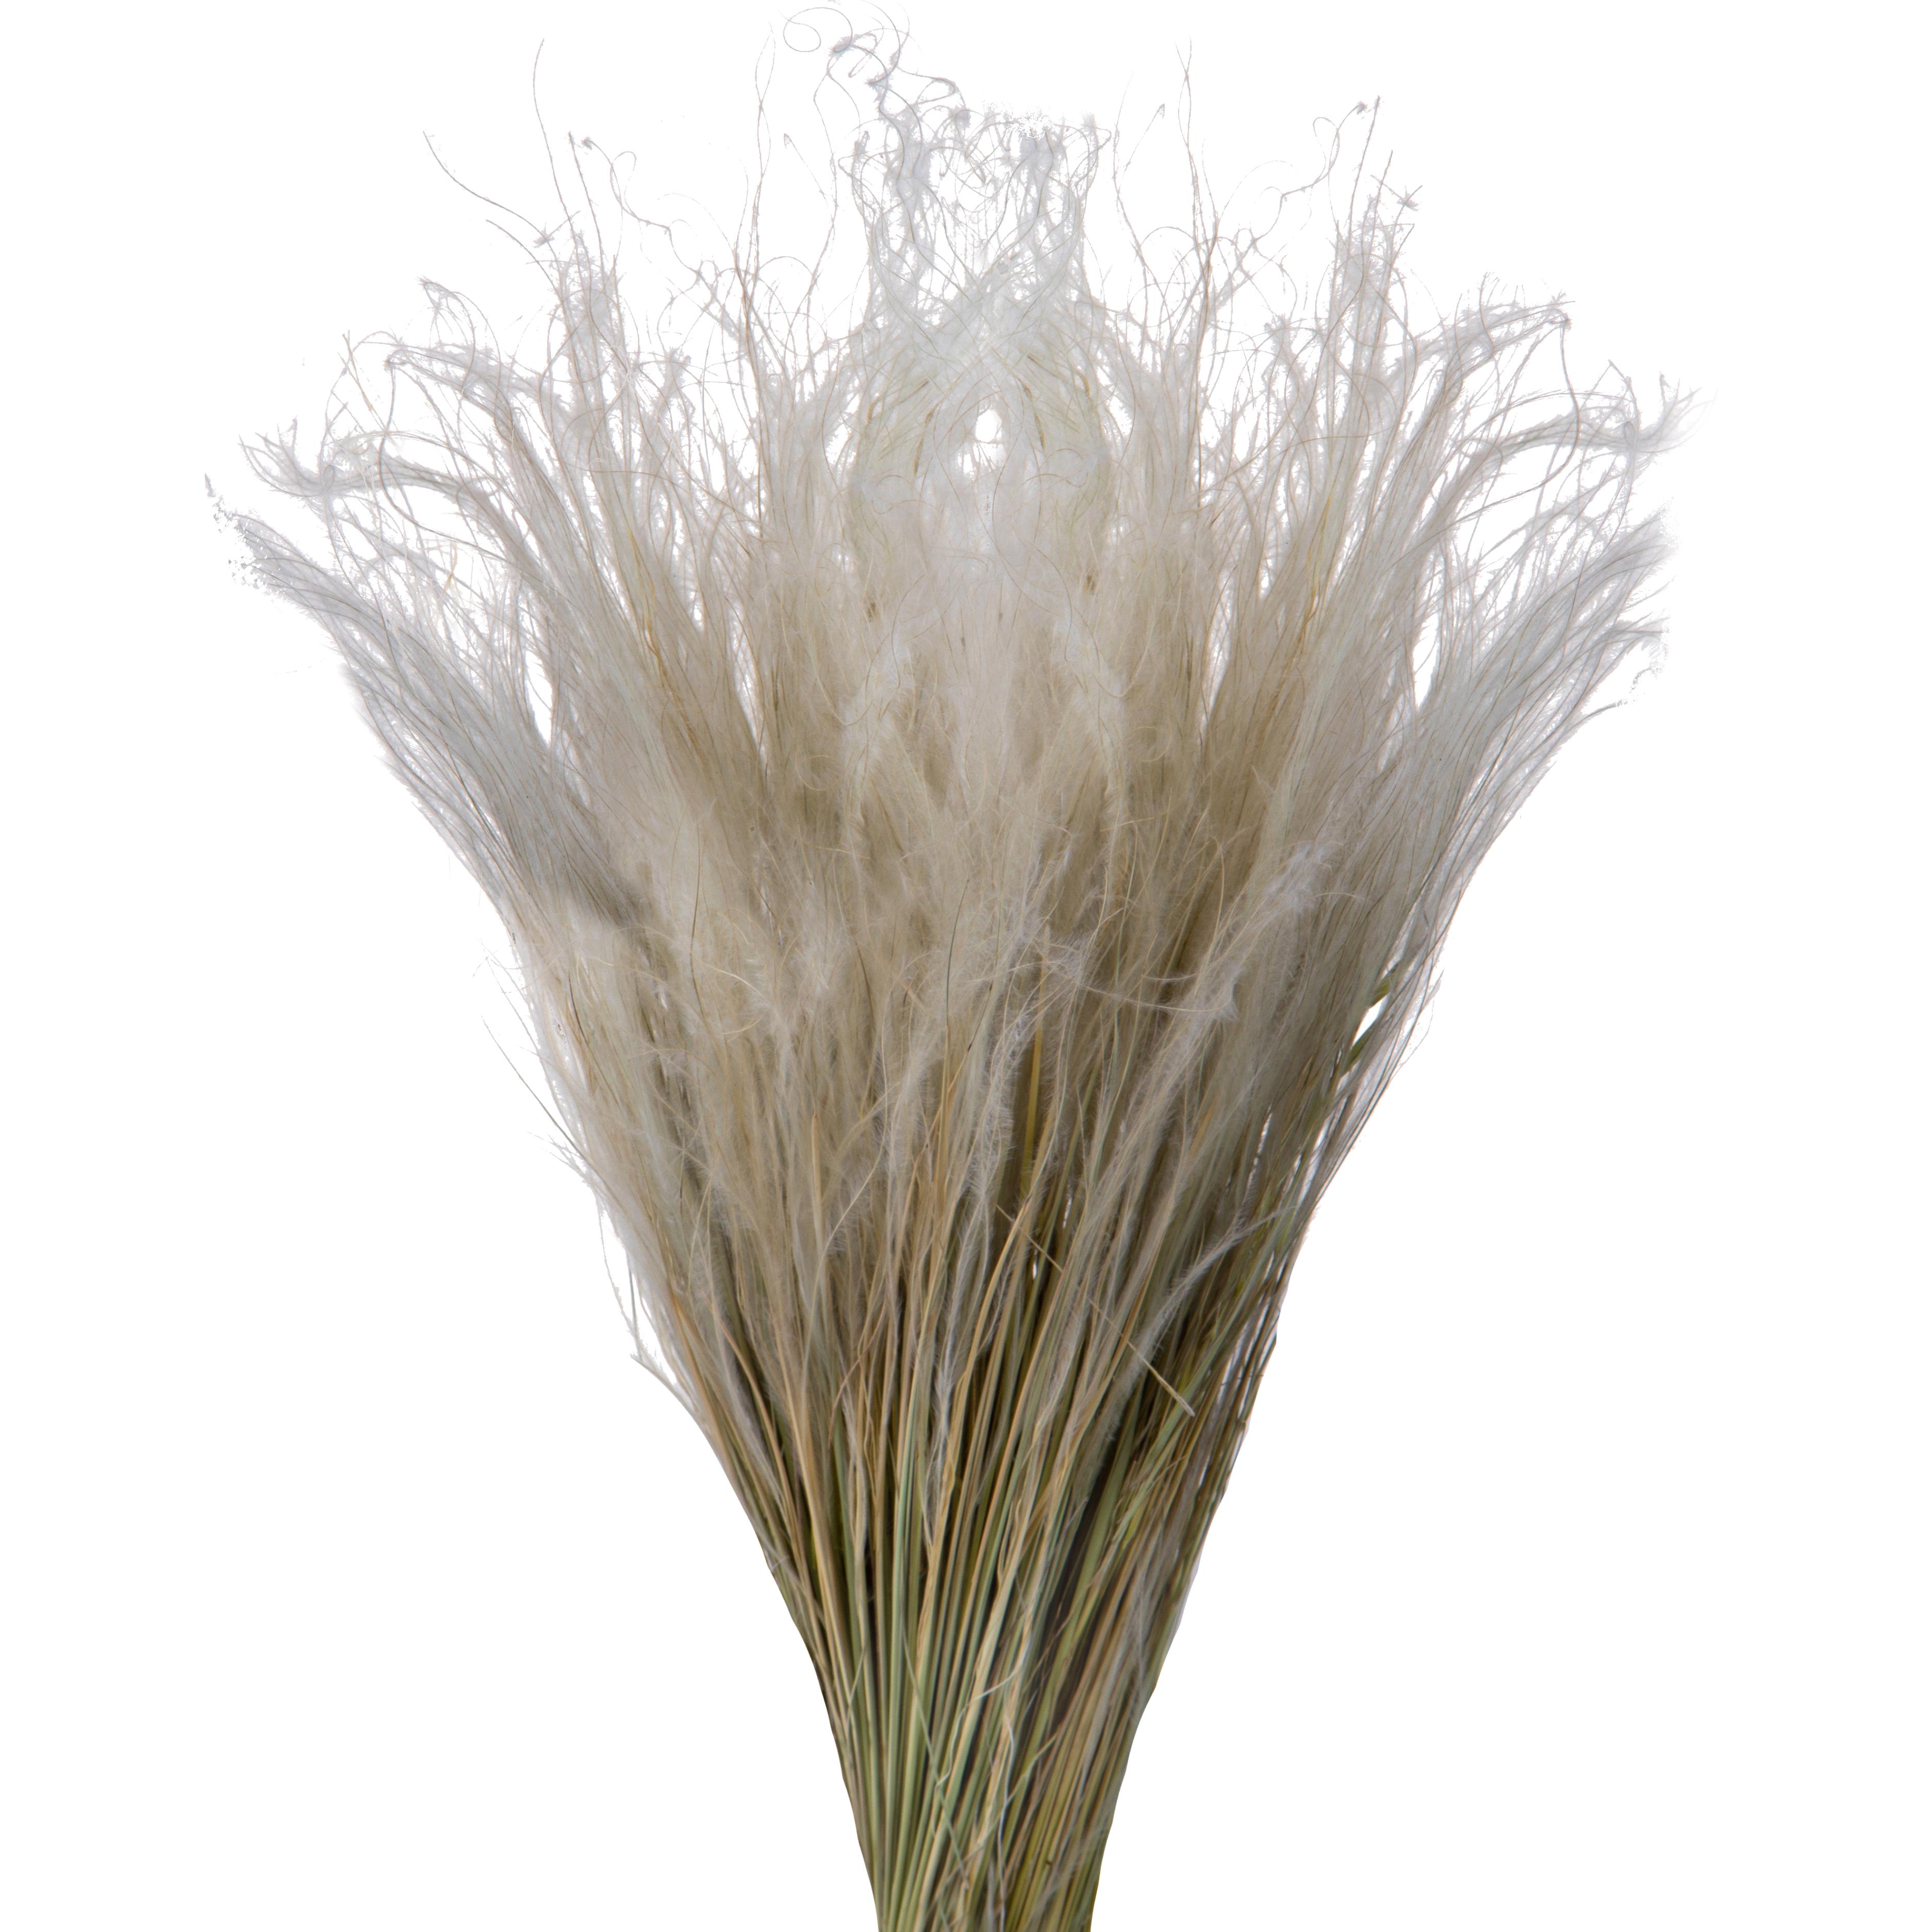 NATURAL PRODUCTS DRIED FLOWERS AND ERBS,STIPA PENNATA NAT. A KG